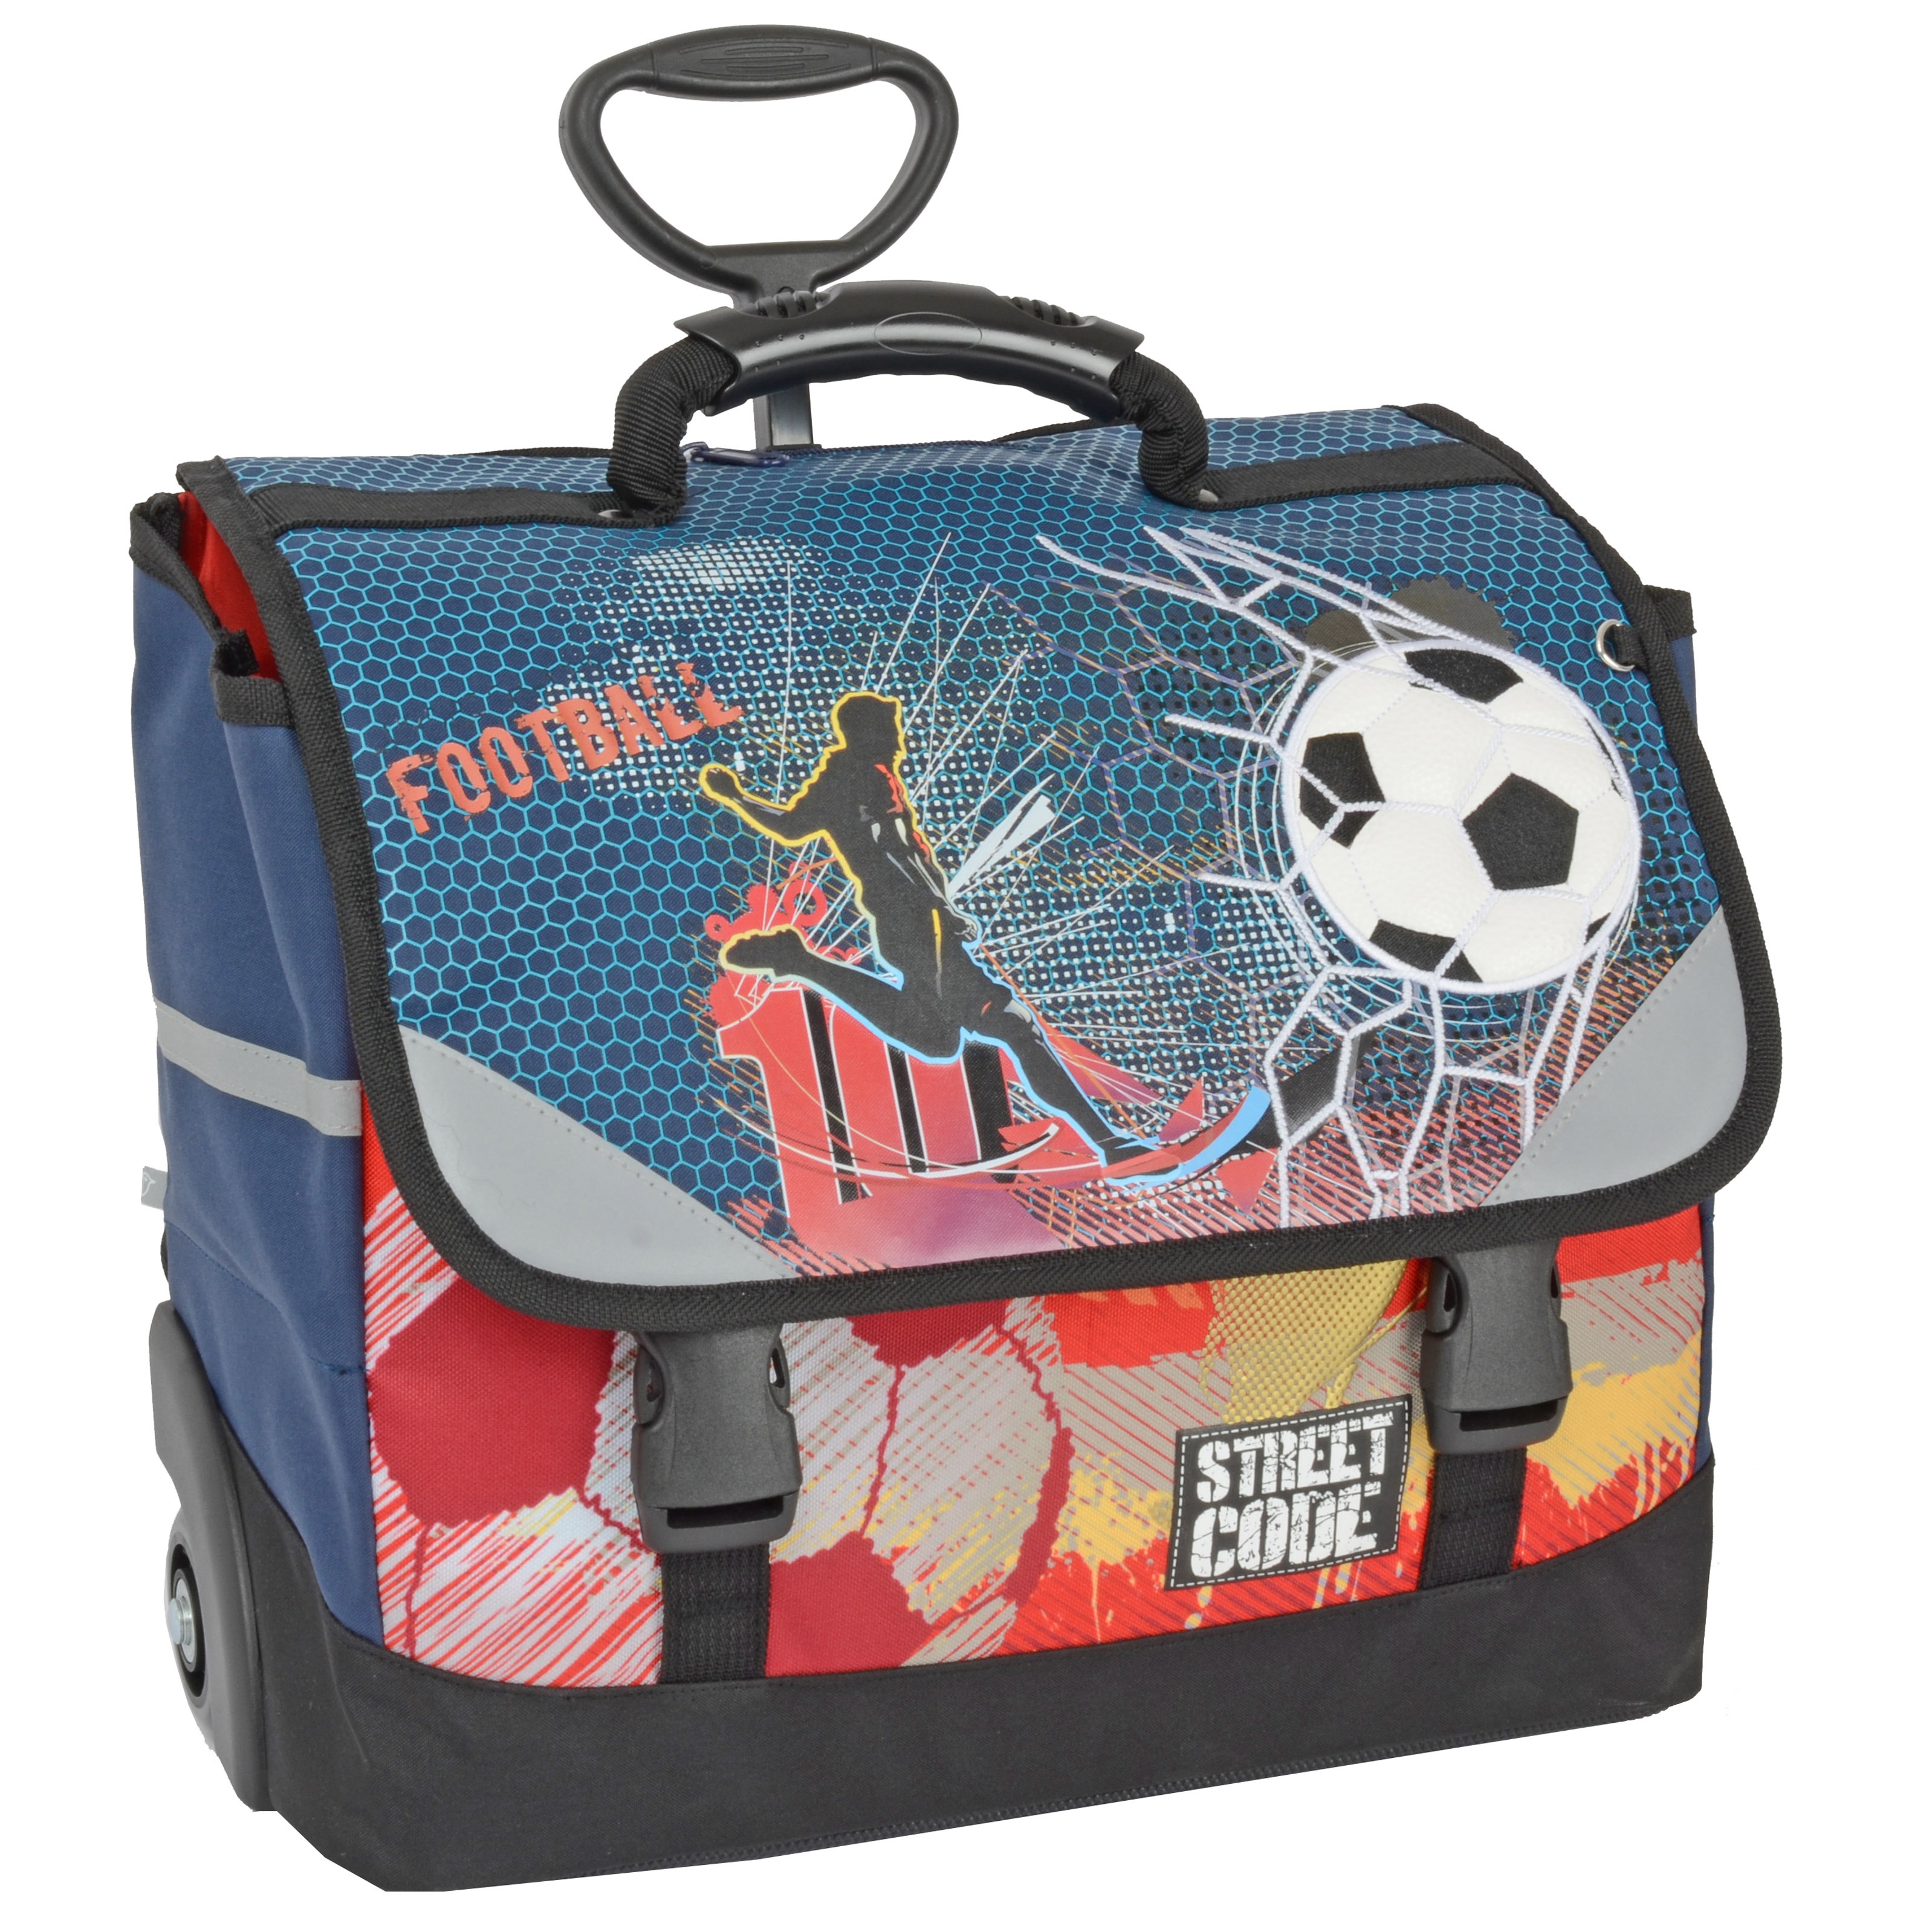 Cartable A Roulettes 2 Compartiments Football